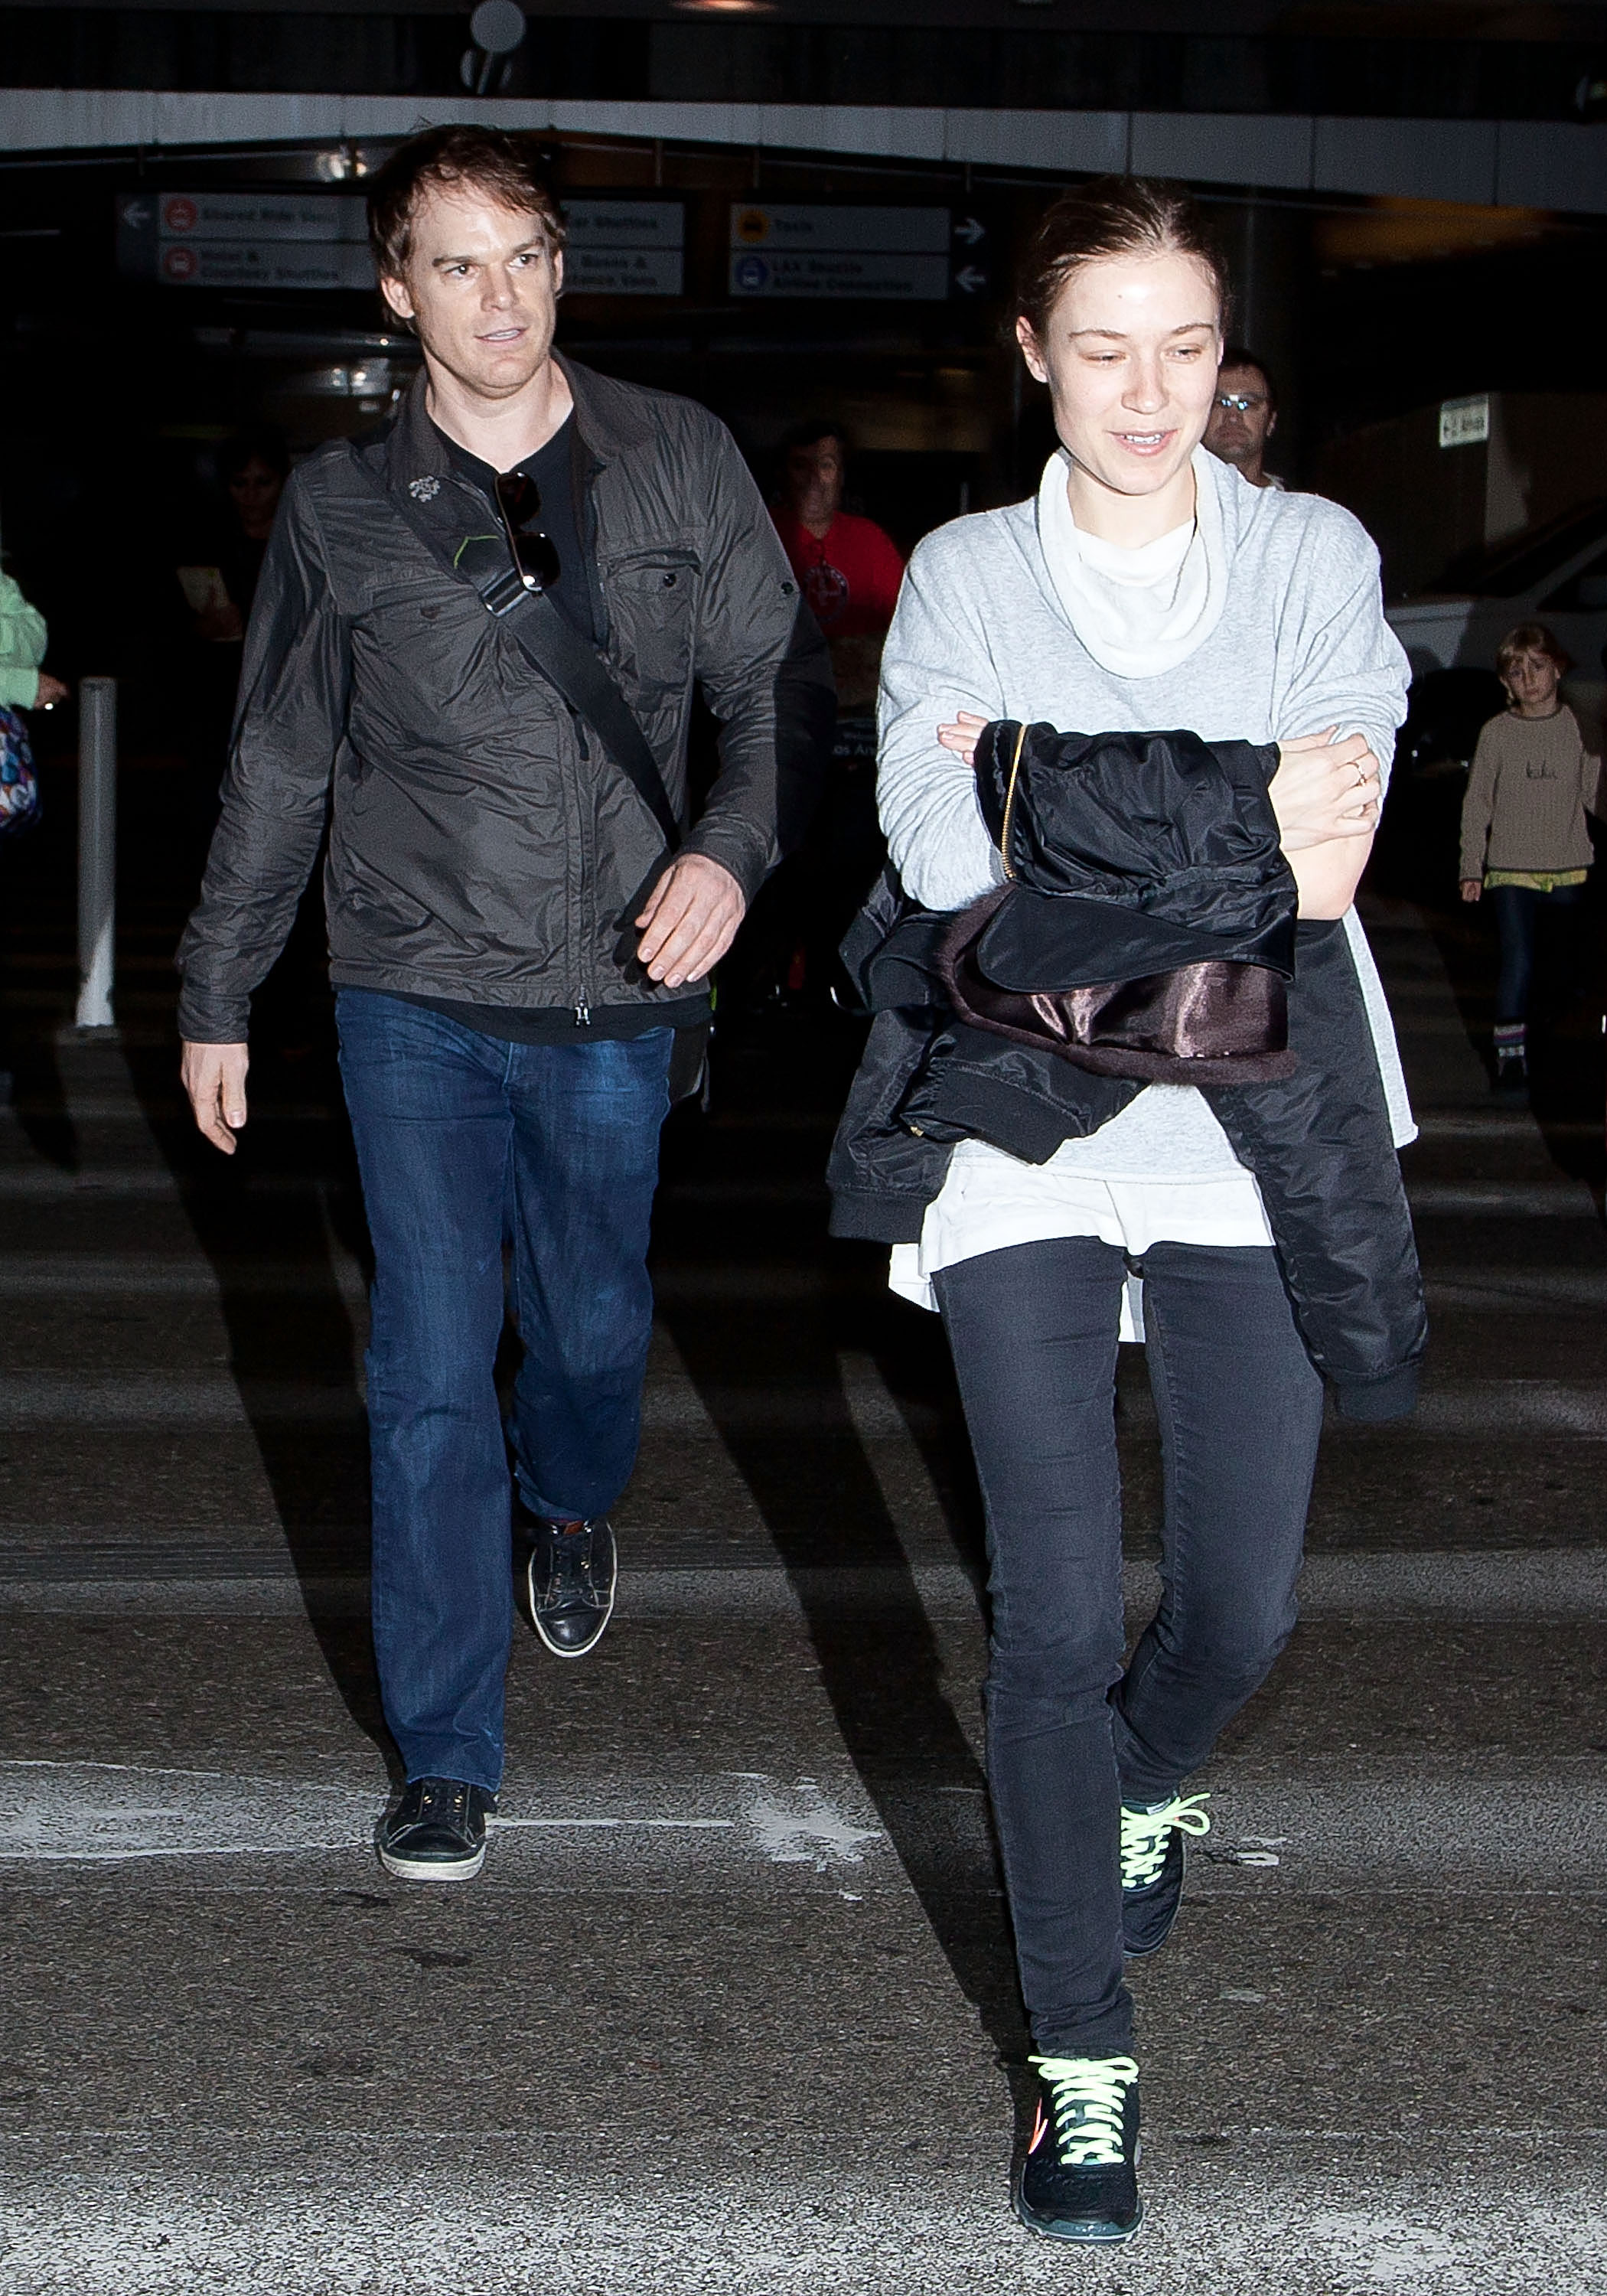 Michael C. Hall and Morgan MacGregor are seen and photgraphed at the Los Angeles International Airport on November 25, 2012 | Source: Getty Images